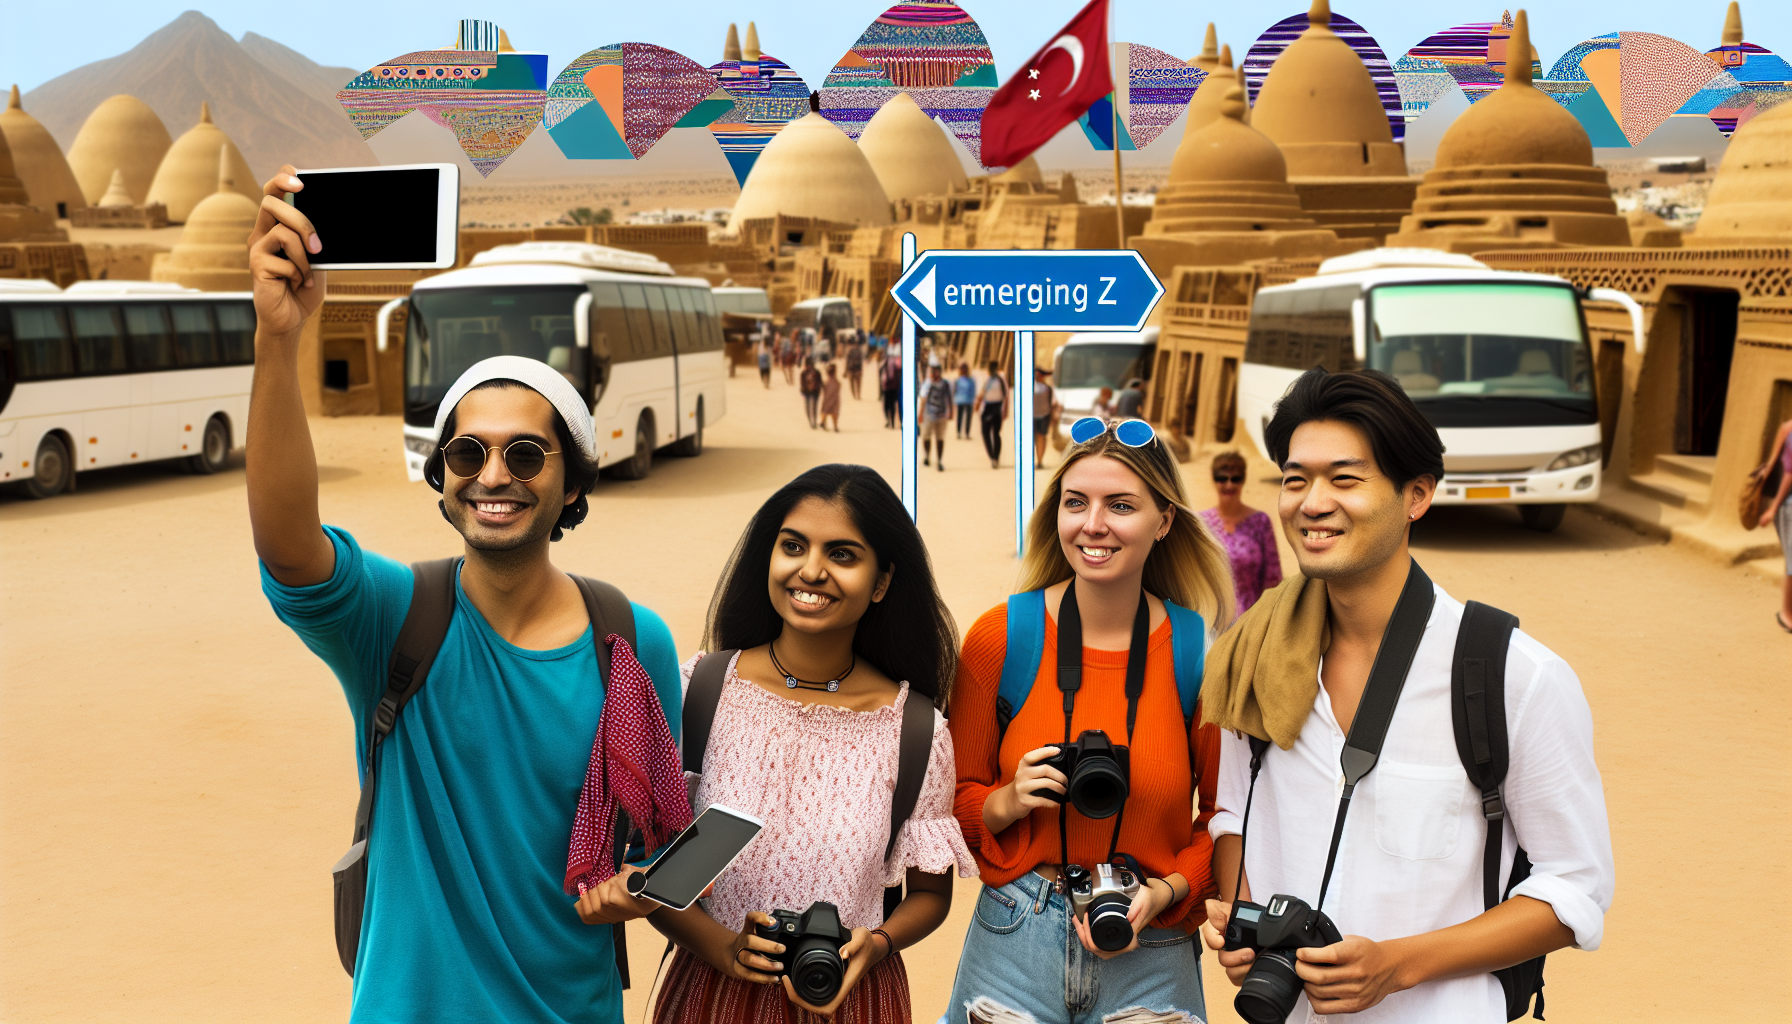 Gen z and millennials shift travel trends towards guided tours and emerging destinations